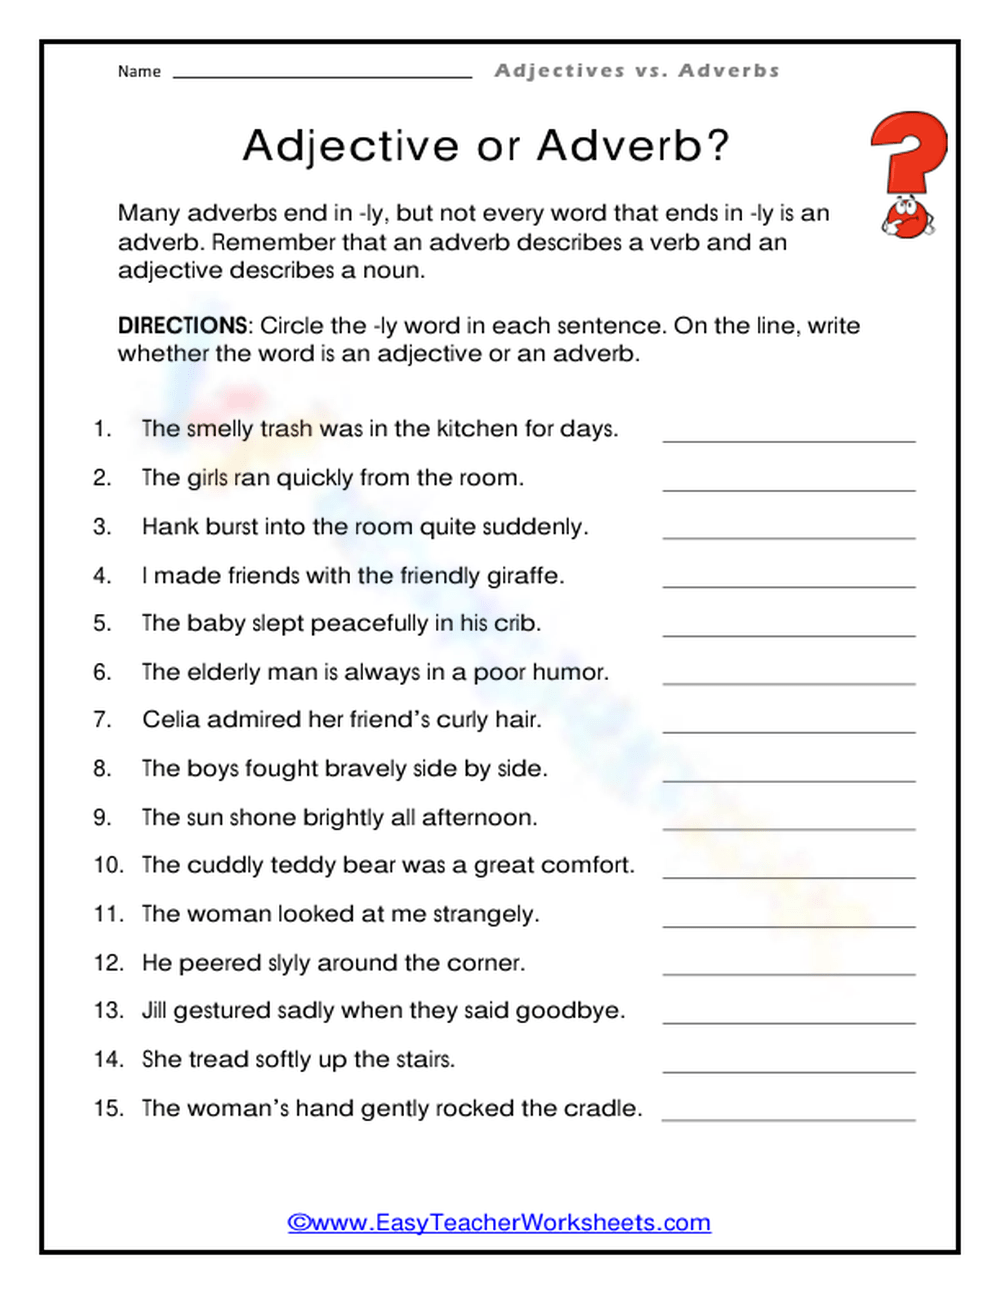 Adjective Or Adverb Worksheet